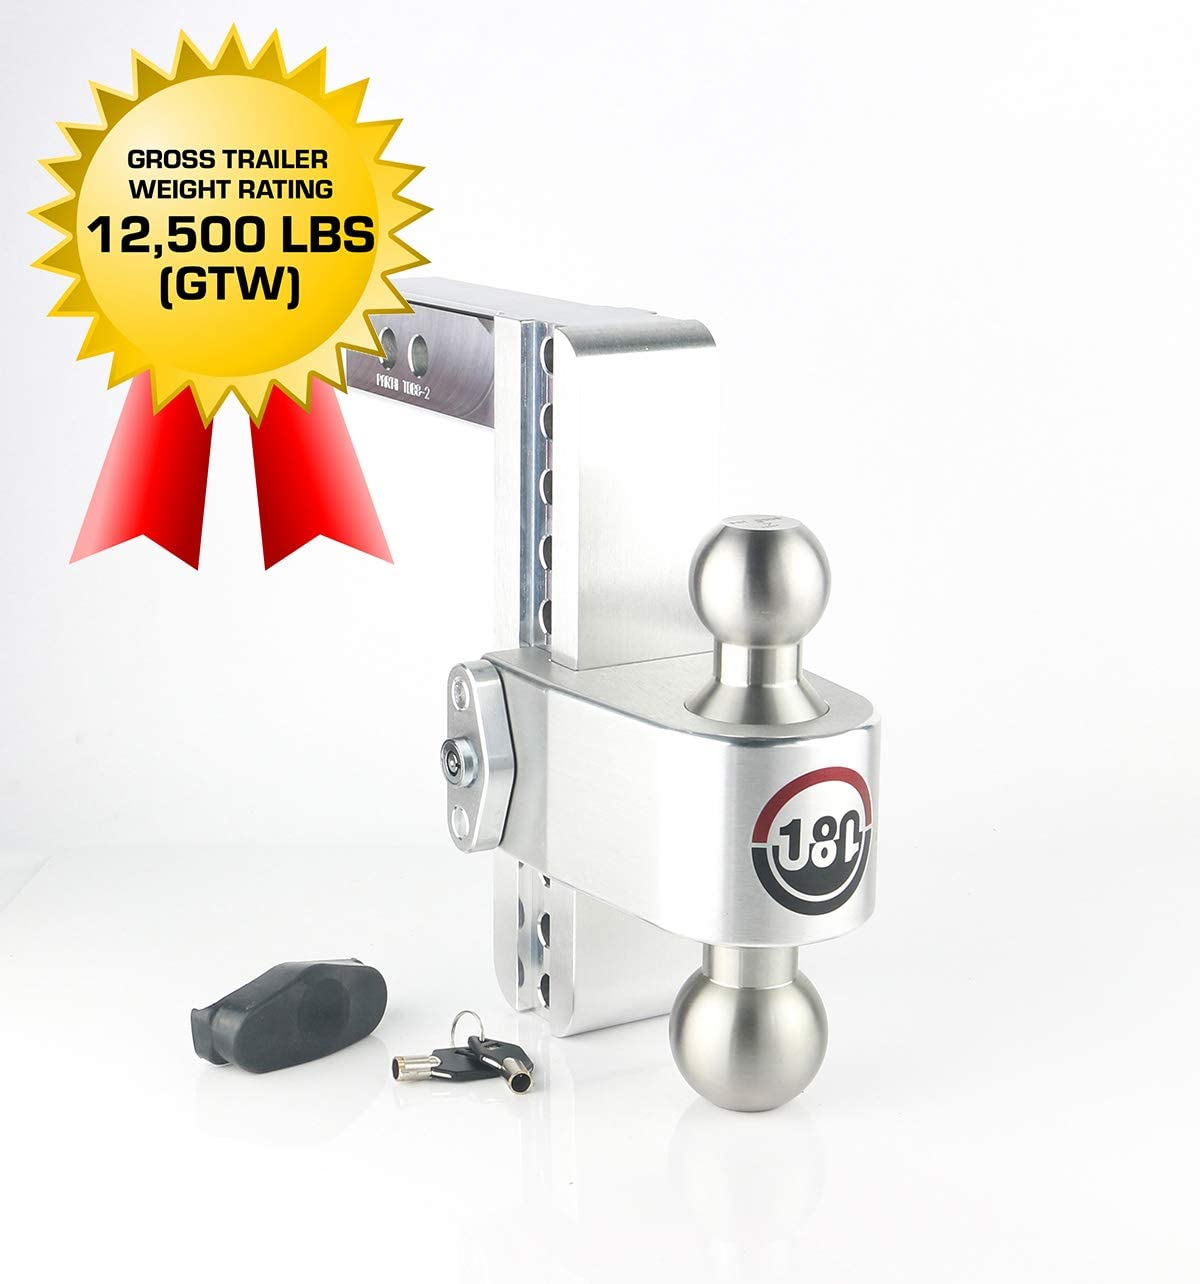 Weigh Safe LTB8-2, 8" Drop 180 Hitch w/ 2" Shank/Shaft, Adjustable Aluminum Trailer Hitch & Ball Mount, Stainless Steel Combo Ball (2" & 2-5/16") and a Double-pin Key Lock